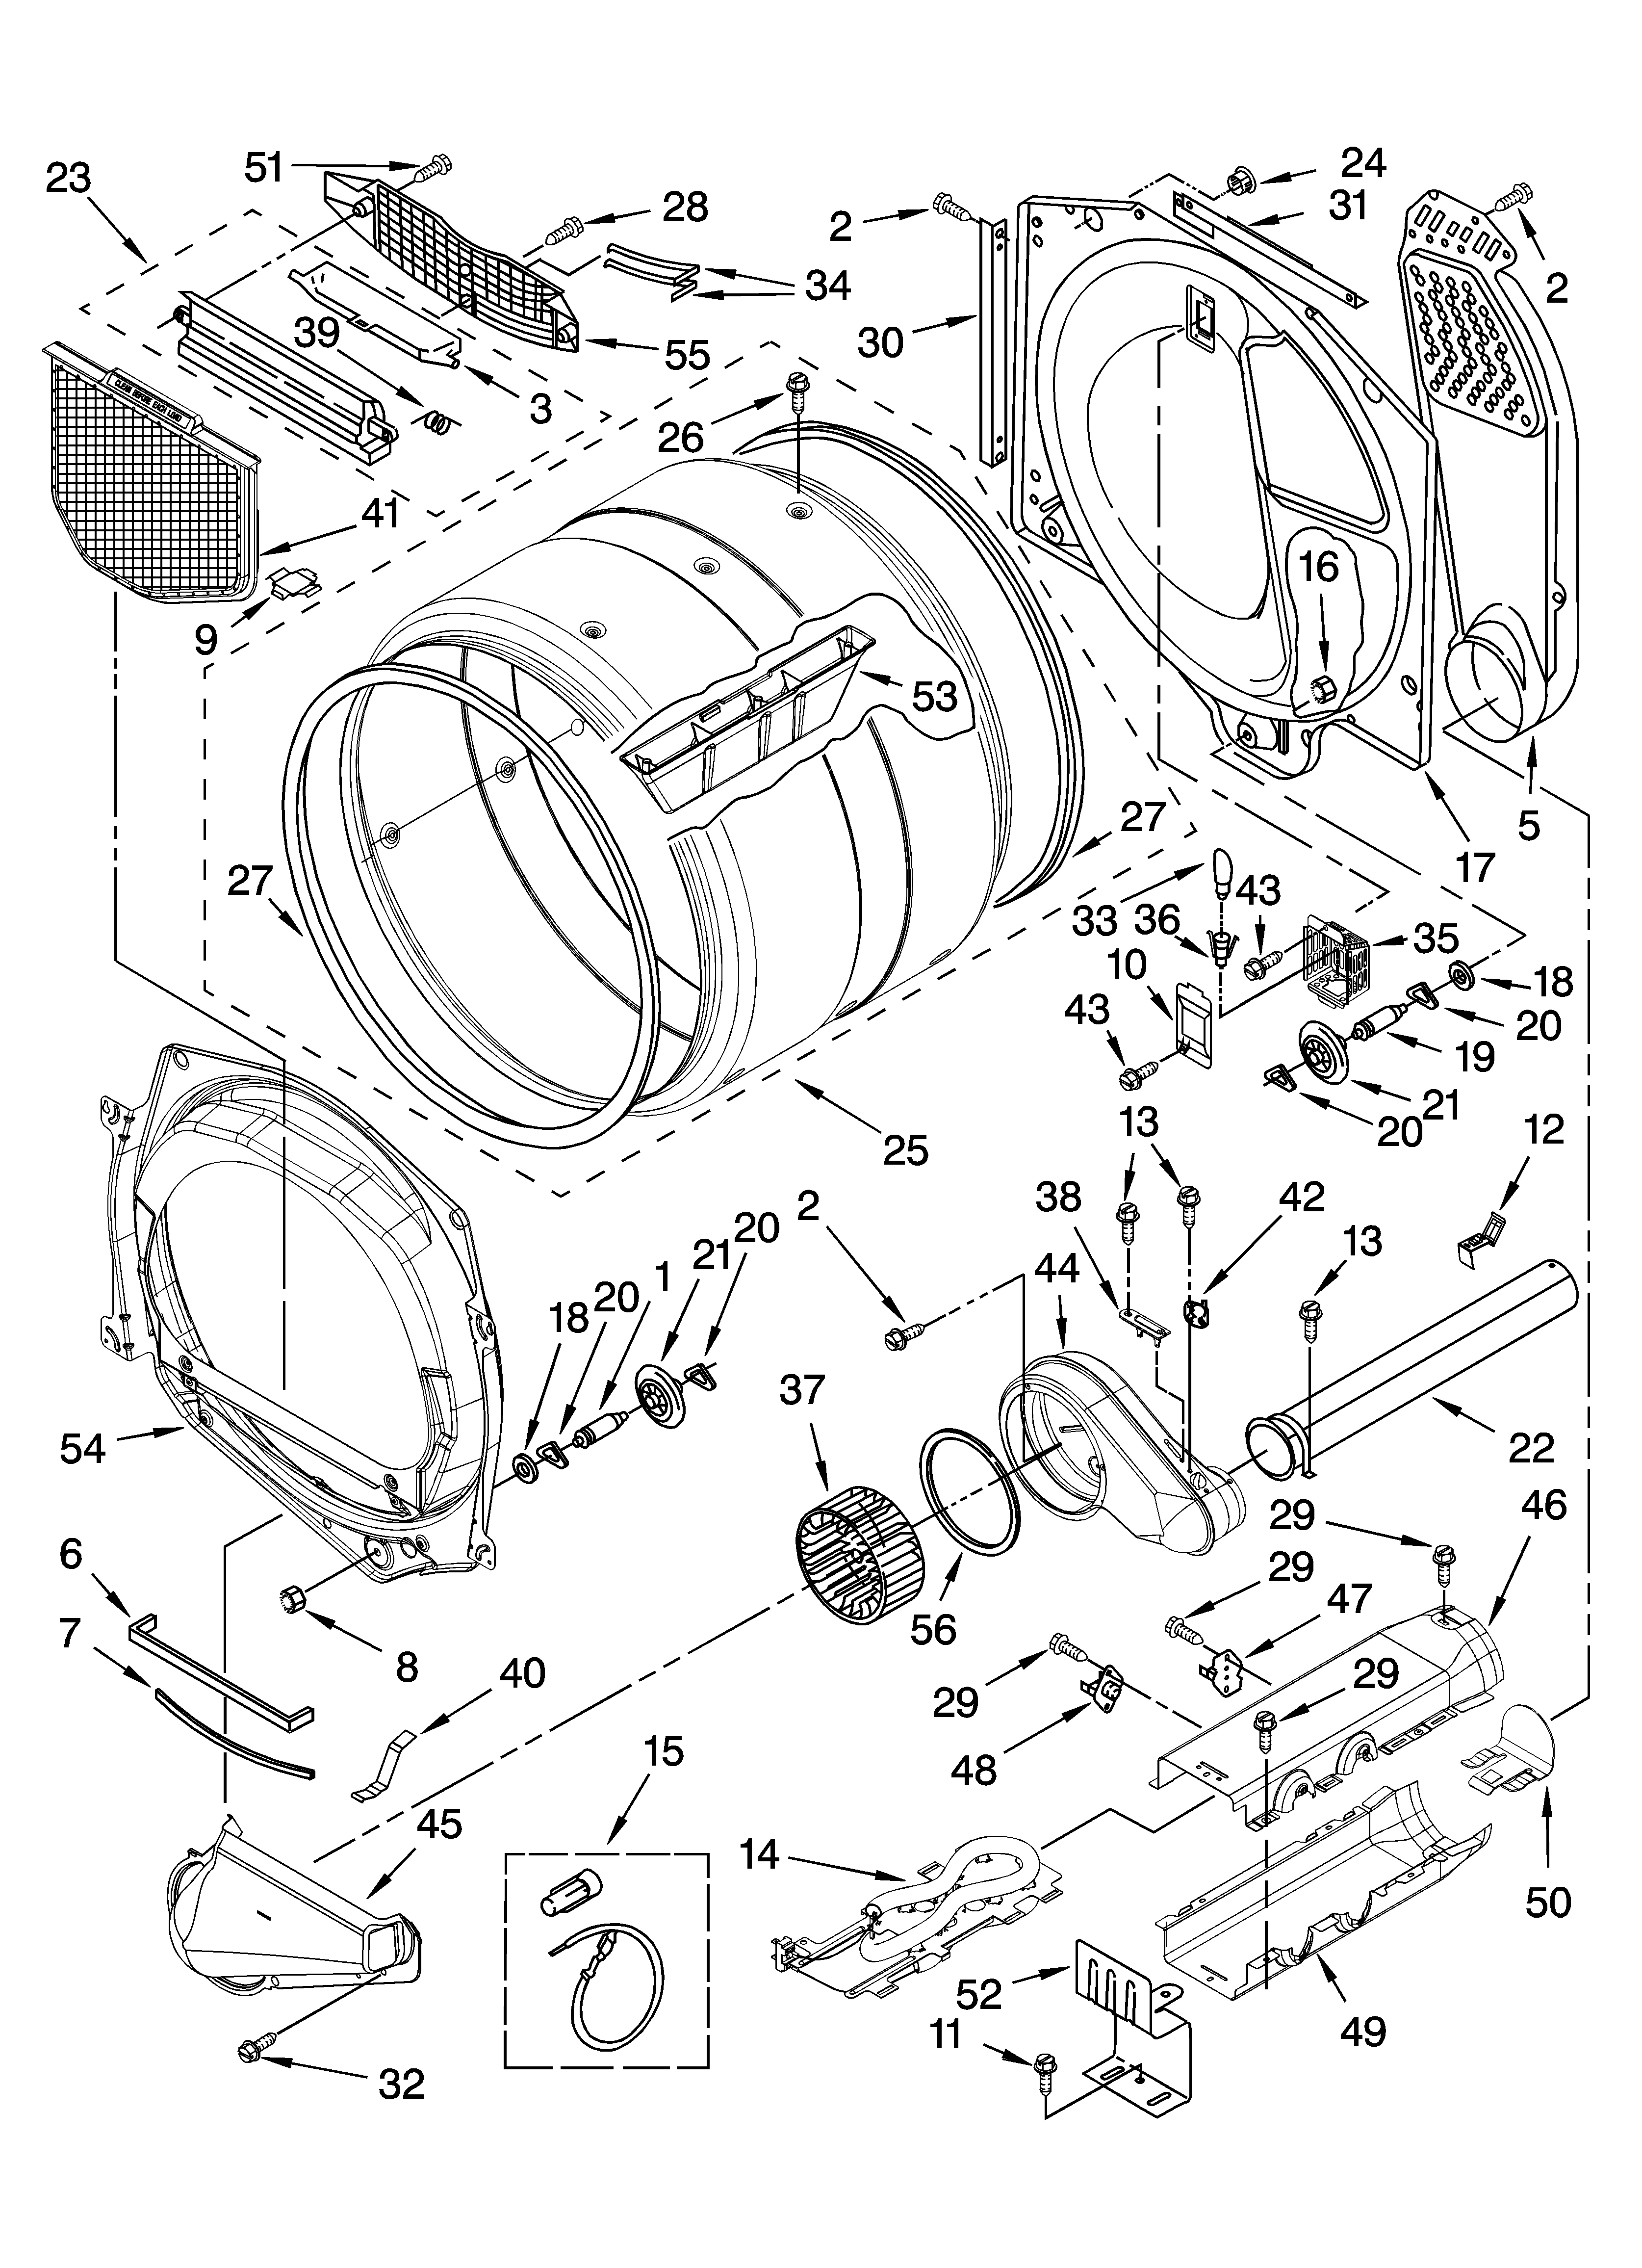 240V Dryer Plug Wiring Diagram from c.searspartsdirect.com